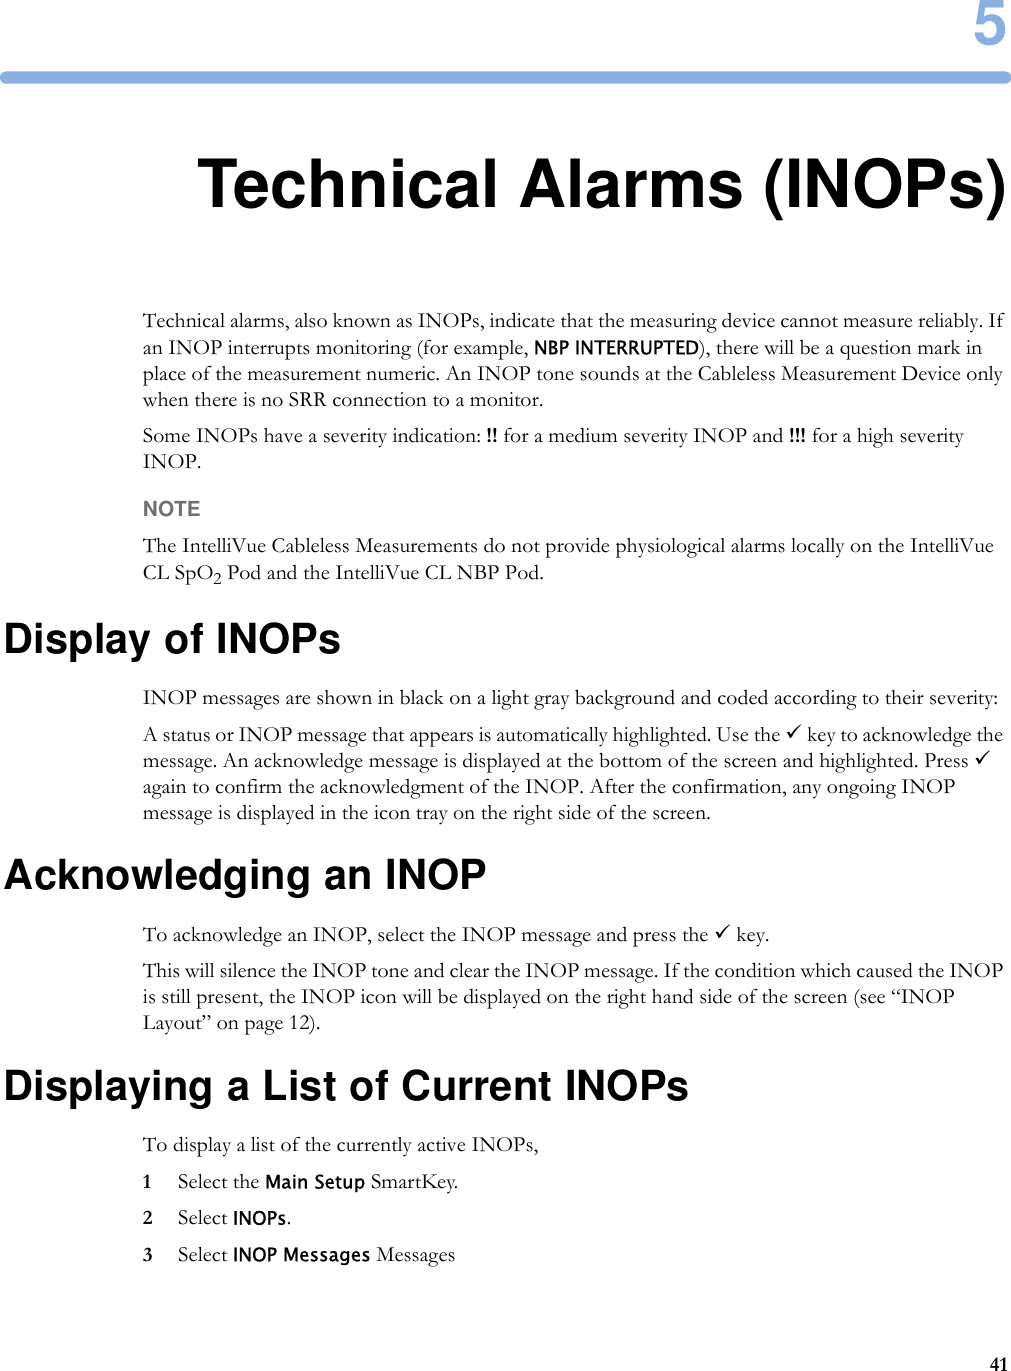 5415Technical Alarms (INOPs)Technical alarms, also known as INOPs, indicate that the measuring device cannot measure reliably. If an INOP interrupts monitoring (for example, NBP INTERRUPTED), there will be a question mark in place of the measurement numeric. An INOP tone sounds at the Cableless Measurement Device only when there is no SRR connection to a monitor. Some INOPs have a severity indication: !! for a medium severity INOP and !!! for a high severity INOP.NOTEThe IntelliVue Cableless Measurements do not provide physiological alarms locally on the IntelliVue CL SpO2 Pod and the IntelliVue CL NBP Pod.Display of INOPsINOP messages are shown in black on a light gray background and coded according to their severity:A status or INOP message that appears is automatically highlighted. Use the 9 key to acknowledge the message. An acknowledge message is displayed at the bottom of the screen and highlighted. Press 9 again to confirm the acknowledgment of the INOP. After the confirmation, any ongoing INOP message is displayed in the icon tray on the right side of the screen.Acknowledging an INOPTo acknowledge an INOP, select the INOP message and press the 9 key. This will silence the INOP tone and clear the INOP message. If the condition which caused the INOP is still present, the INOP icon will be displayed on the right hand side of the screen (see “INOP Layout” on page 12).Displaying a List of Current INOPsTo display a list of the currently active INOPs, 1Select the Main Setup SmartKey.2Select INOPs.3Select INOP Messages Messages